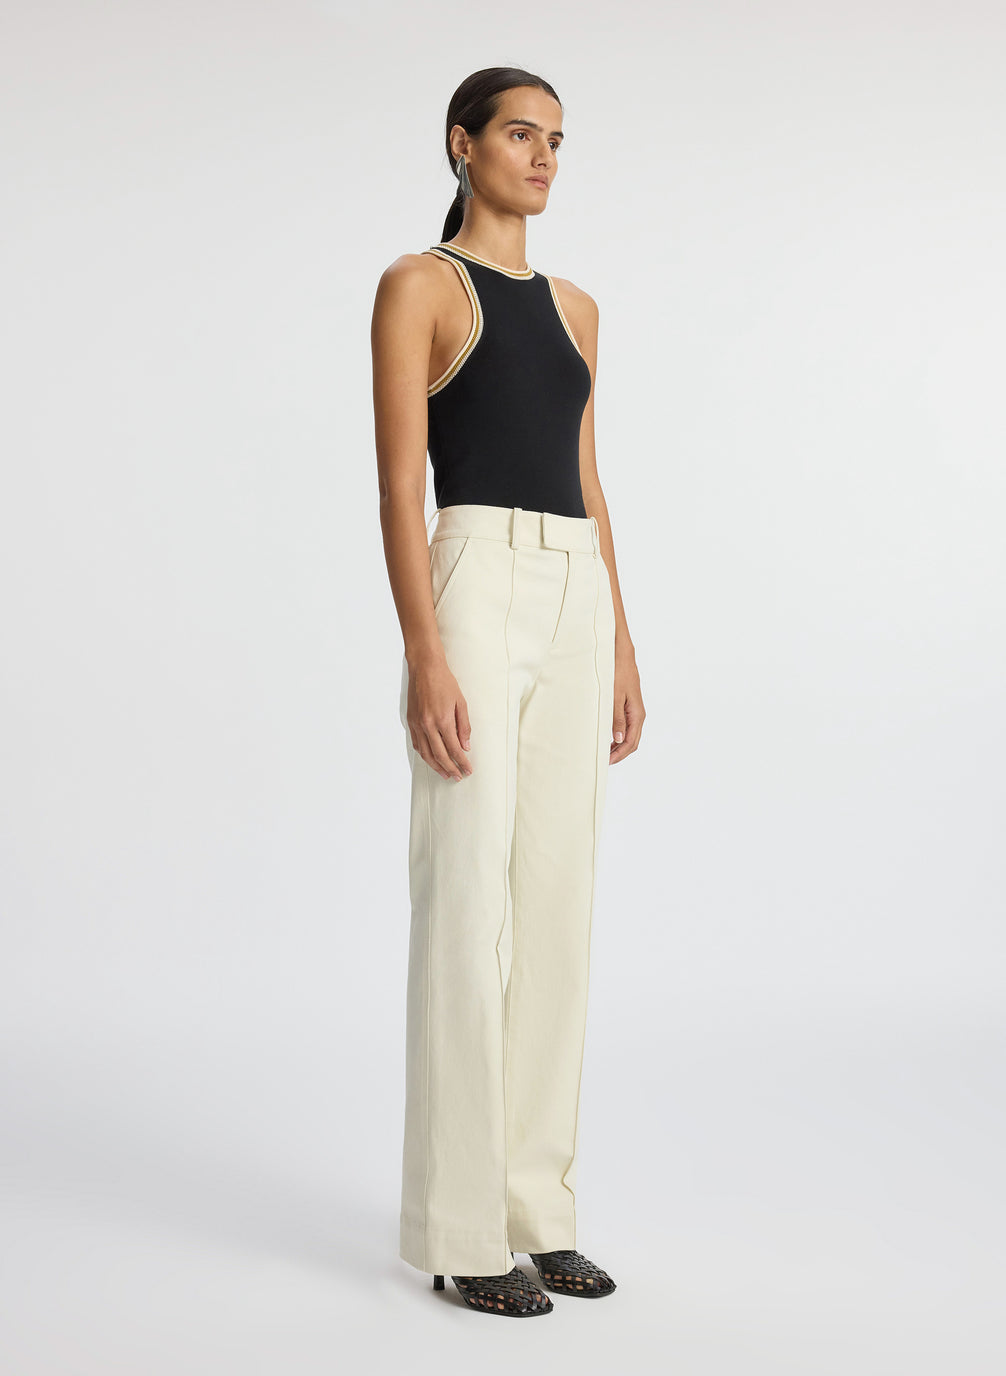 side view of woman wearing black tank top with contrast trim and cream pants